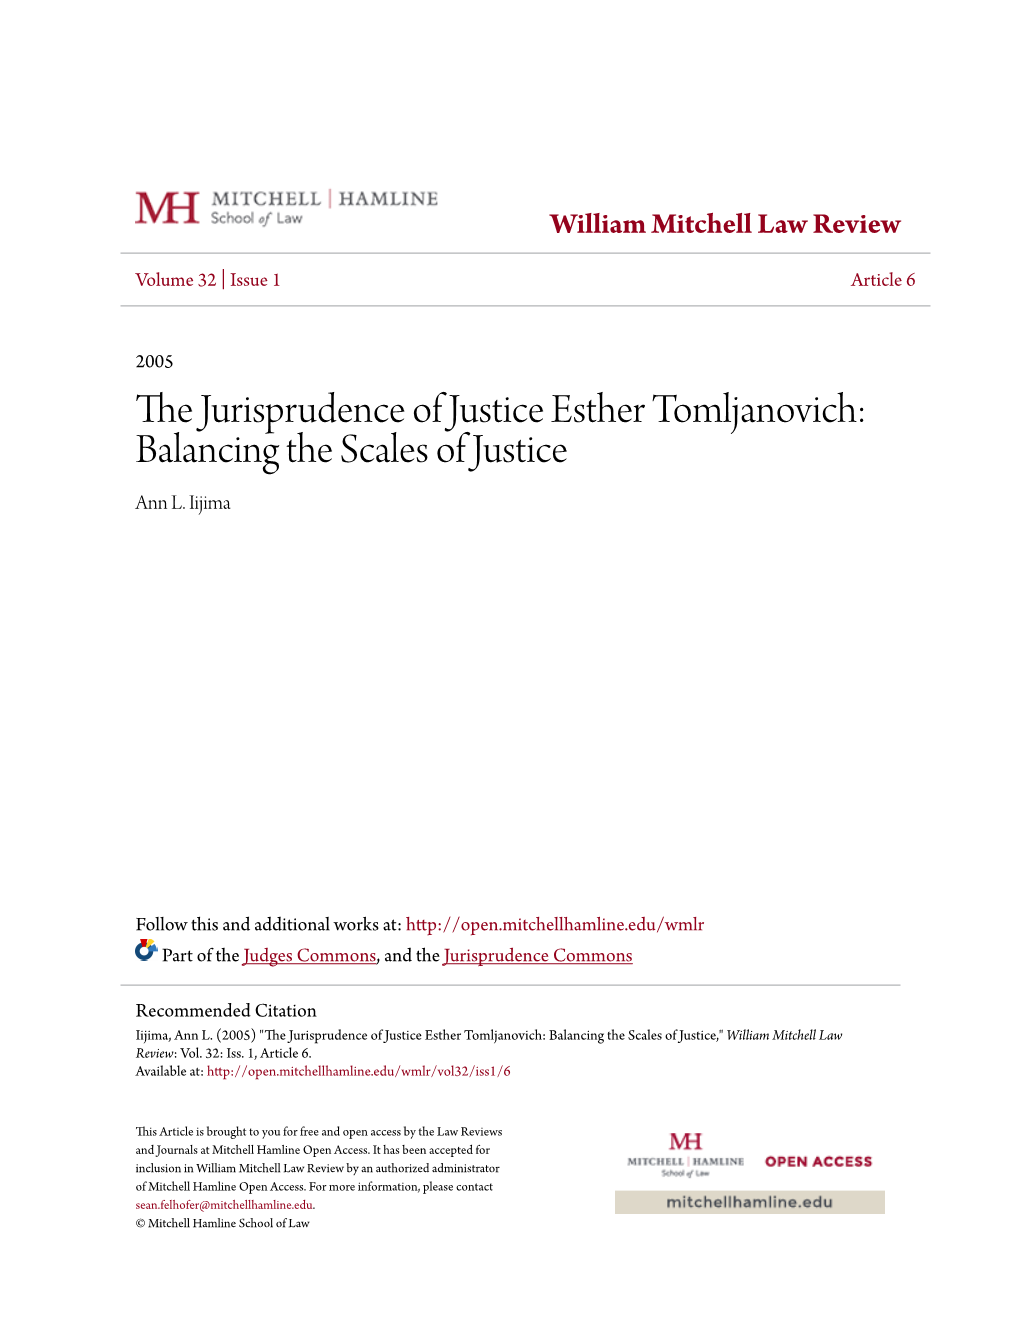 The Jurisprudence of Justice Esther Tomljanovich: Balancing the S